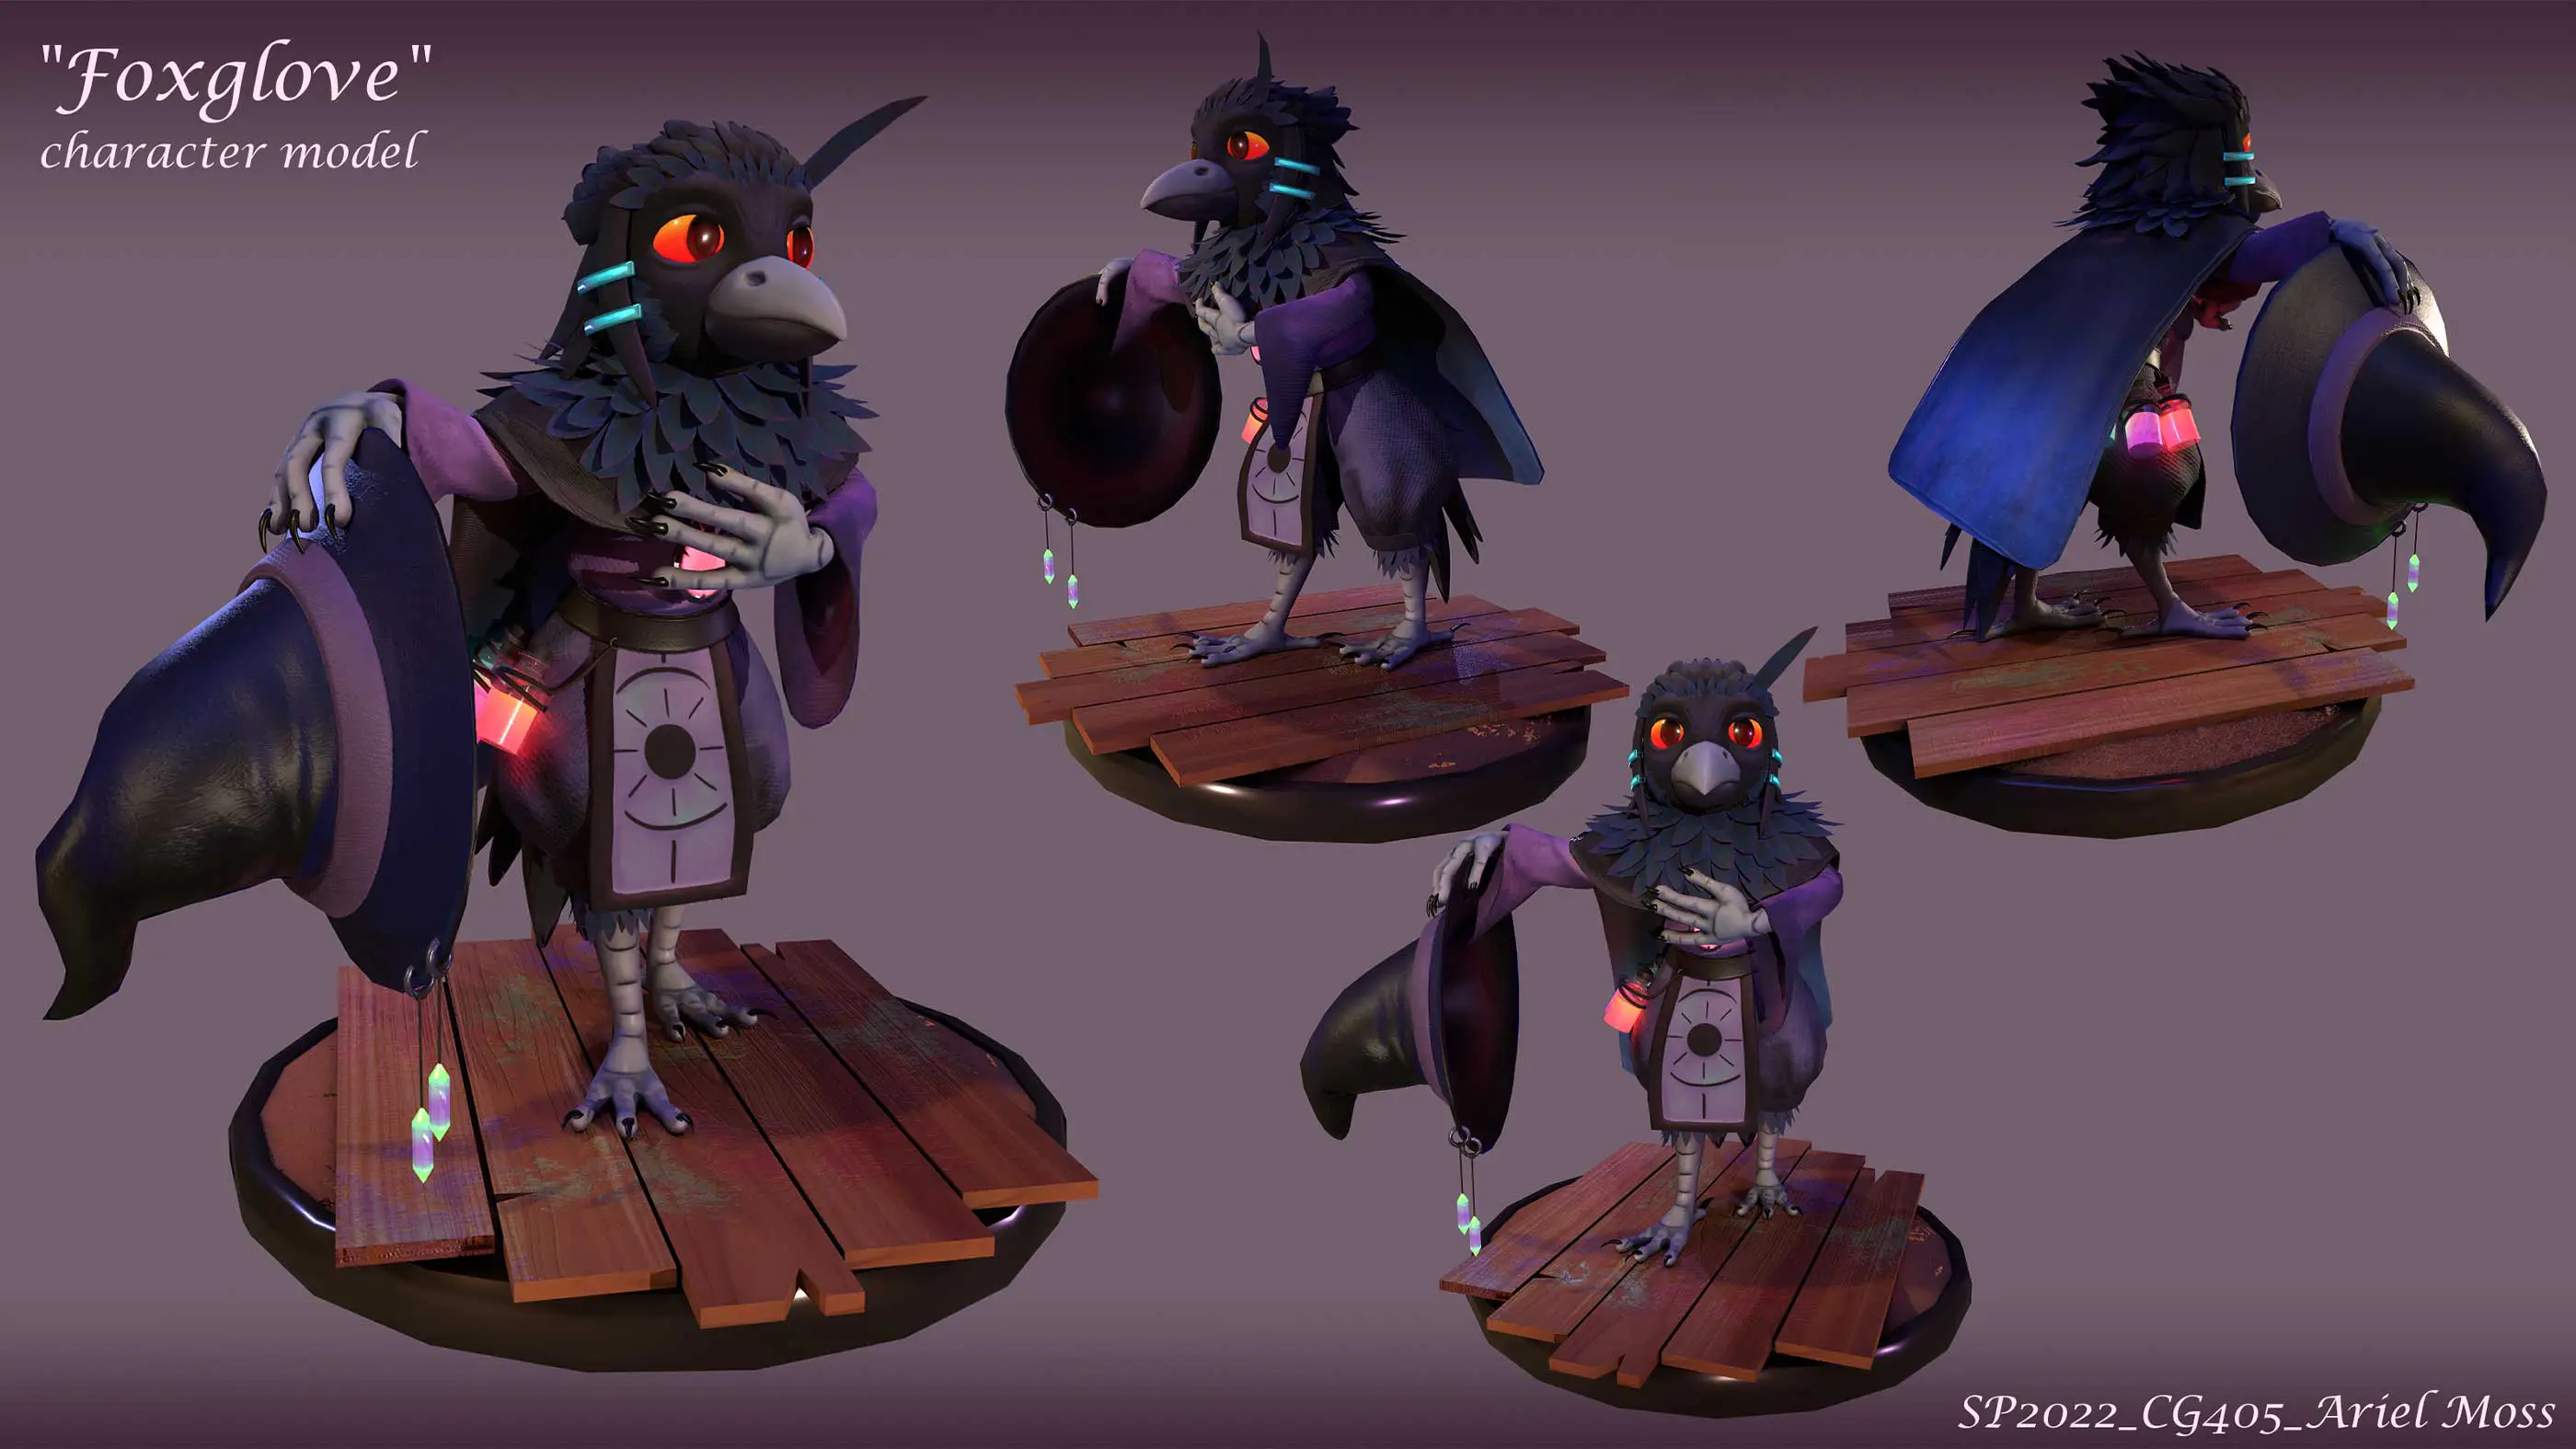 A 3D render of a black bird wearing wizard's clothing.